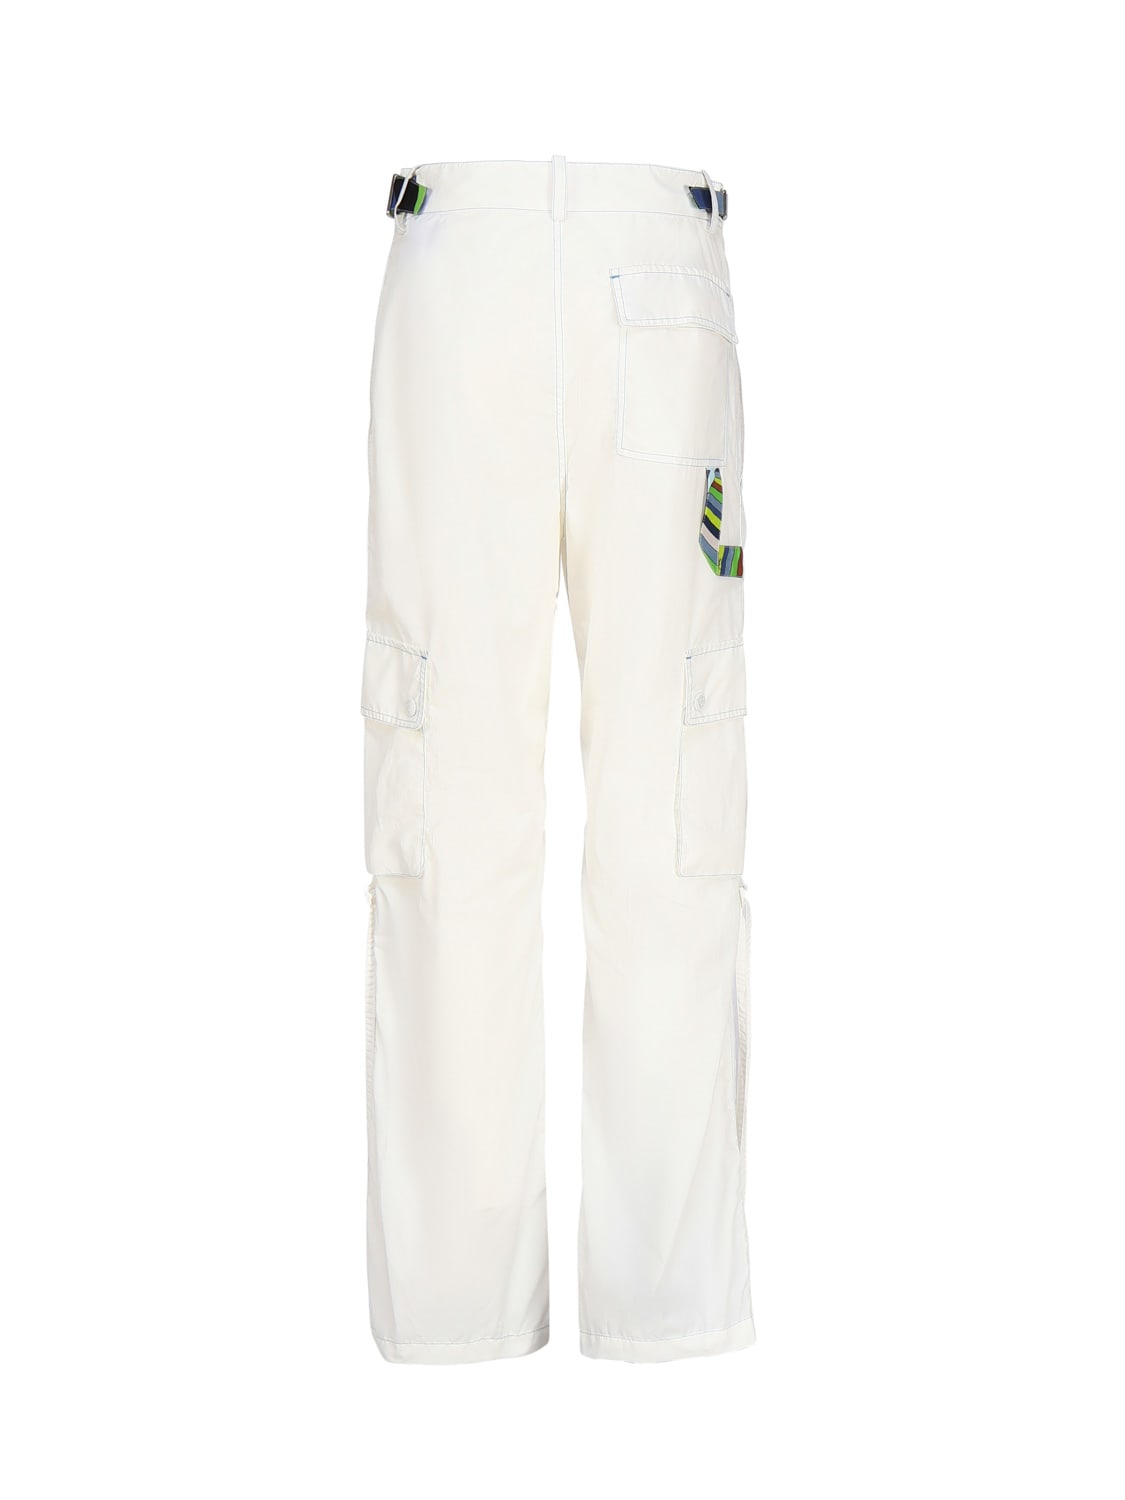 Shop Pucci Iride Cargo Trousers